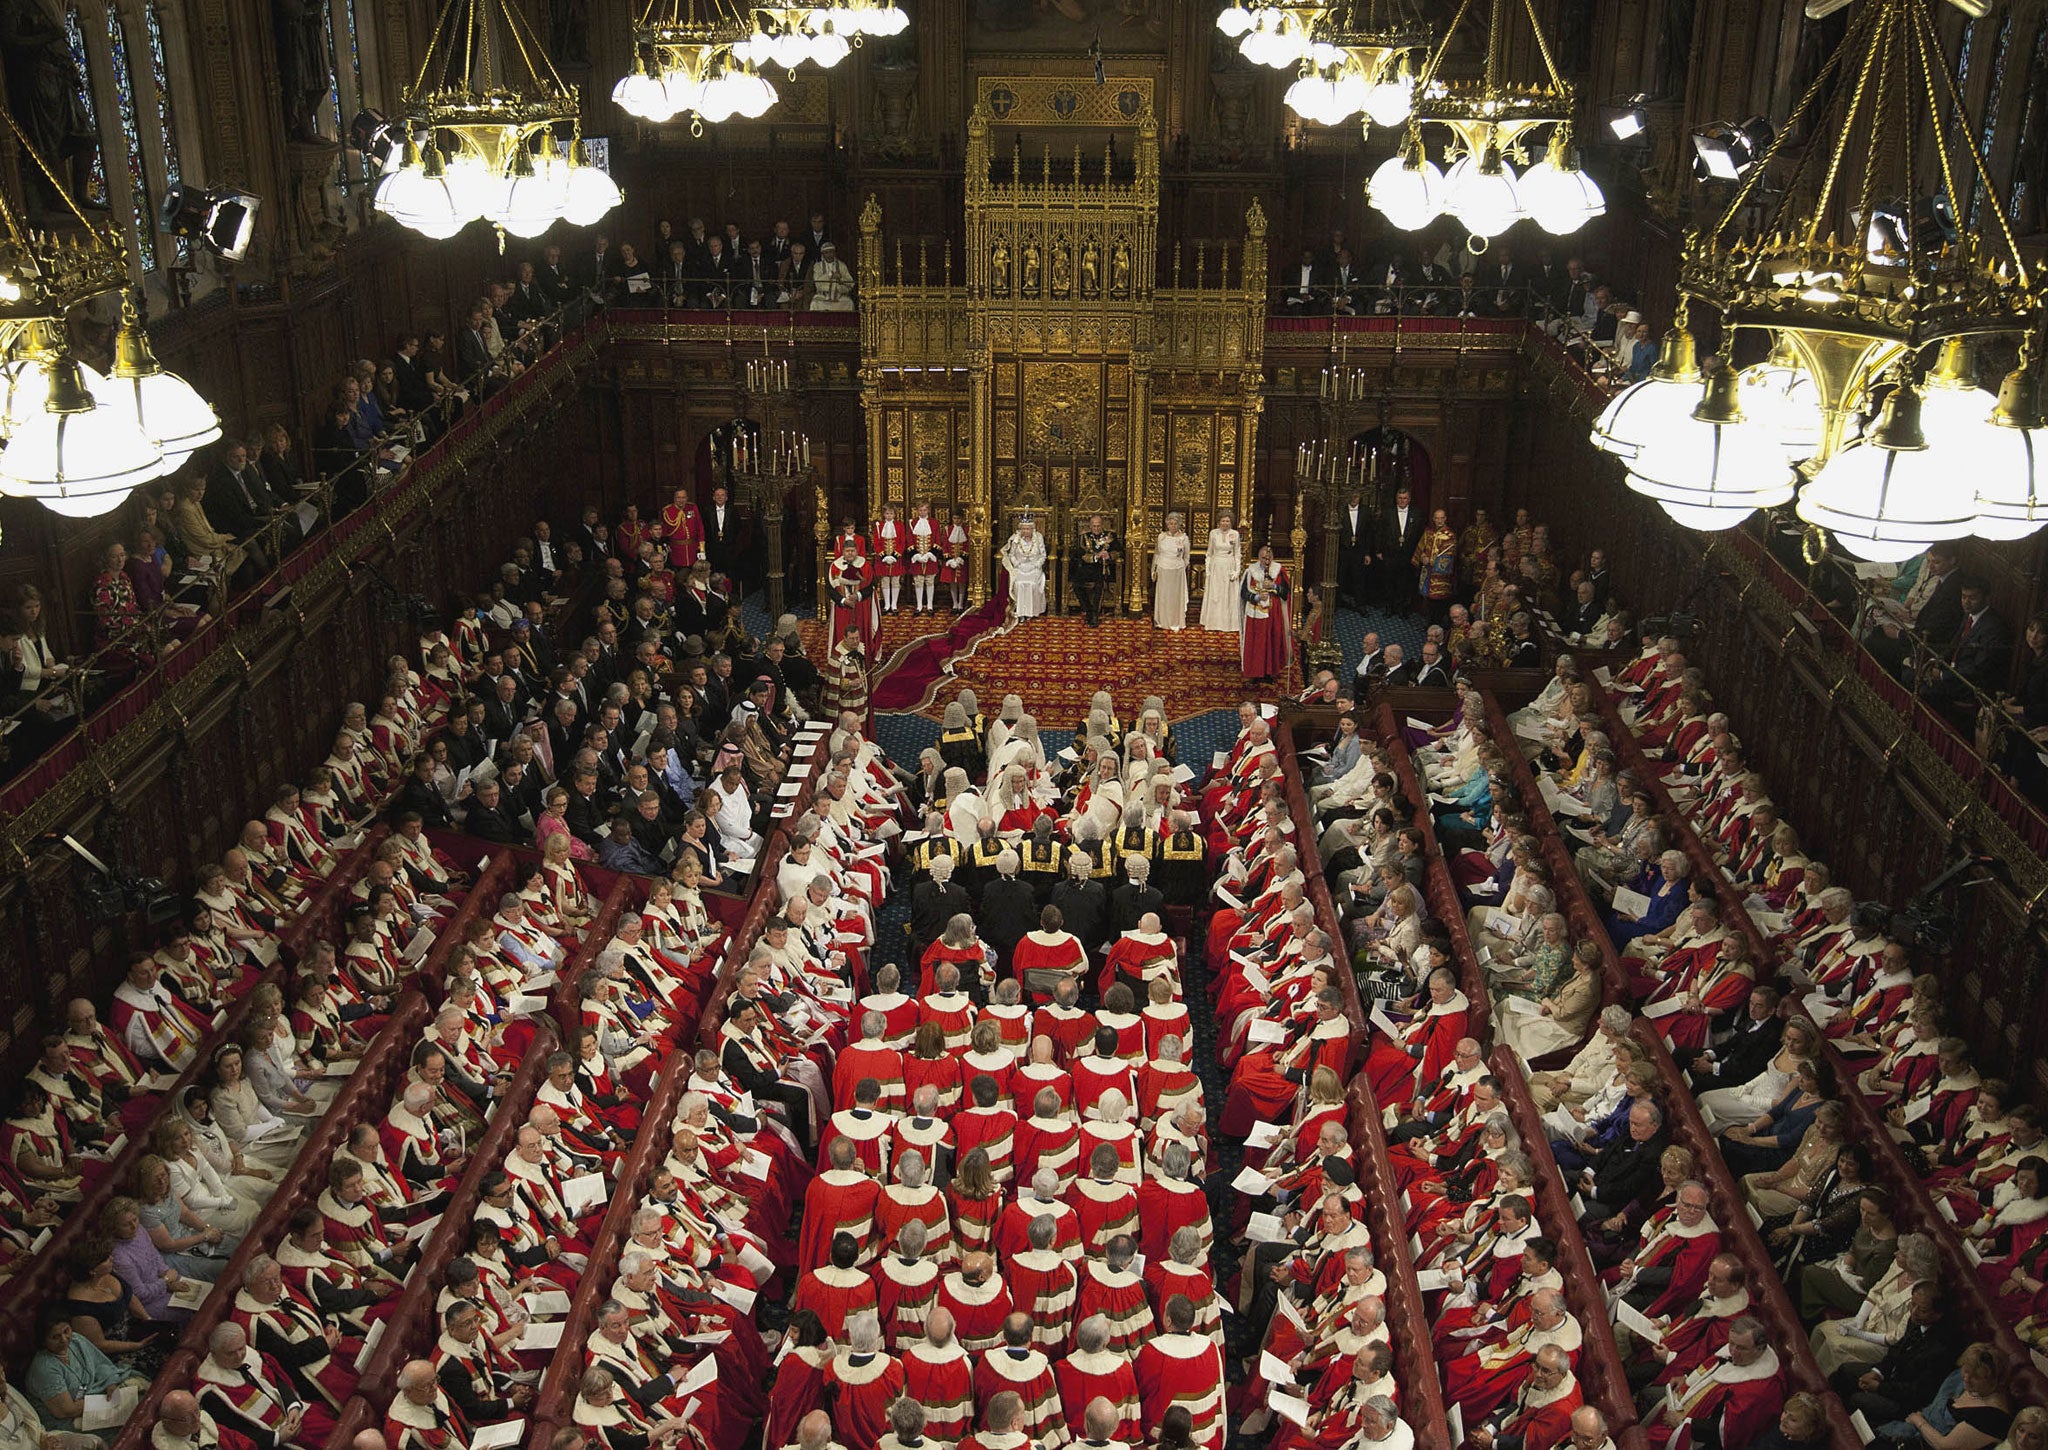 Members of both houses of parliament fill the Chamber of the House of Lords to listen to the Queen's Speech in May 2012